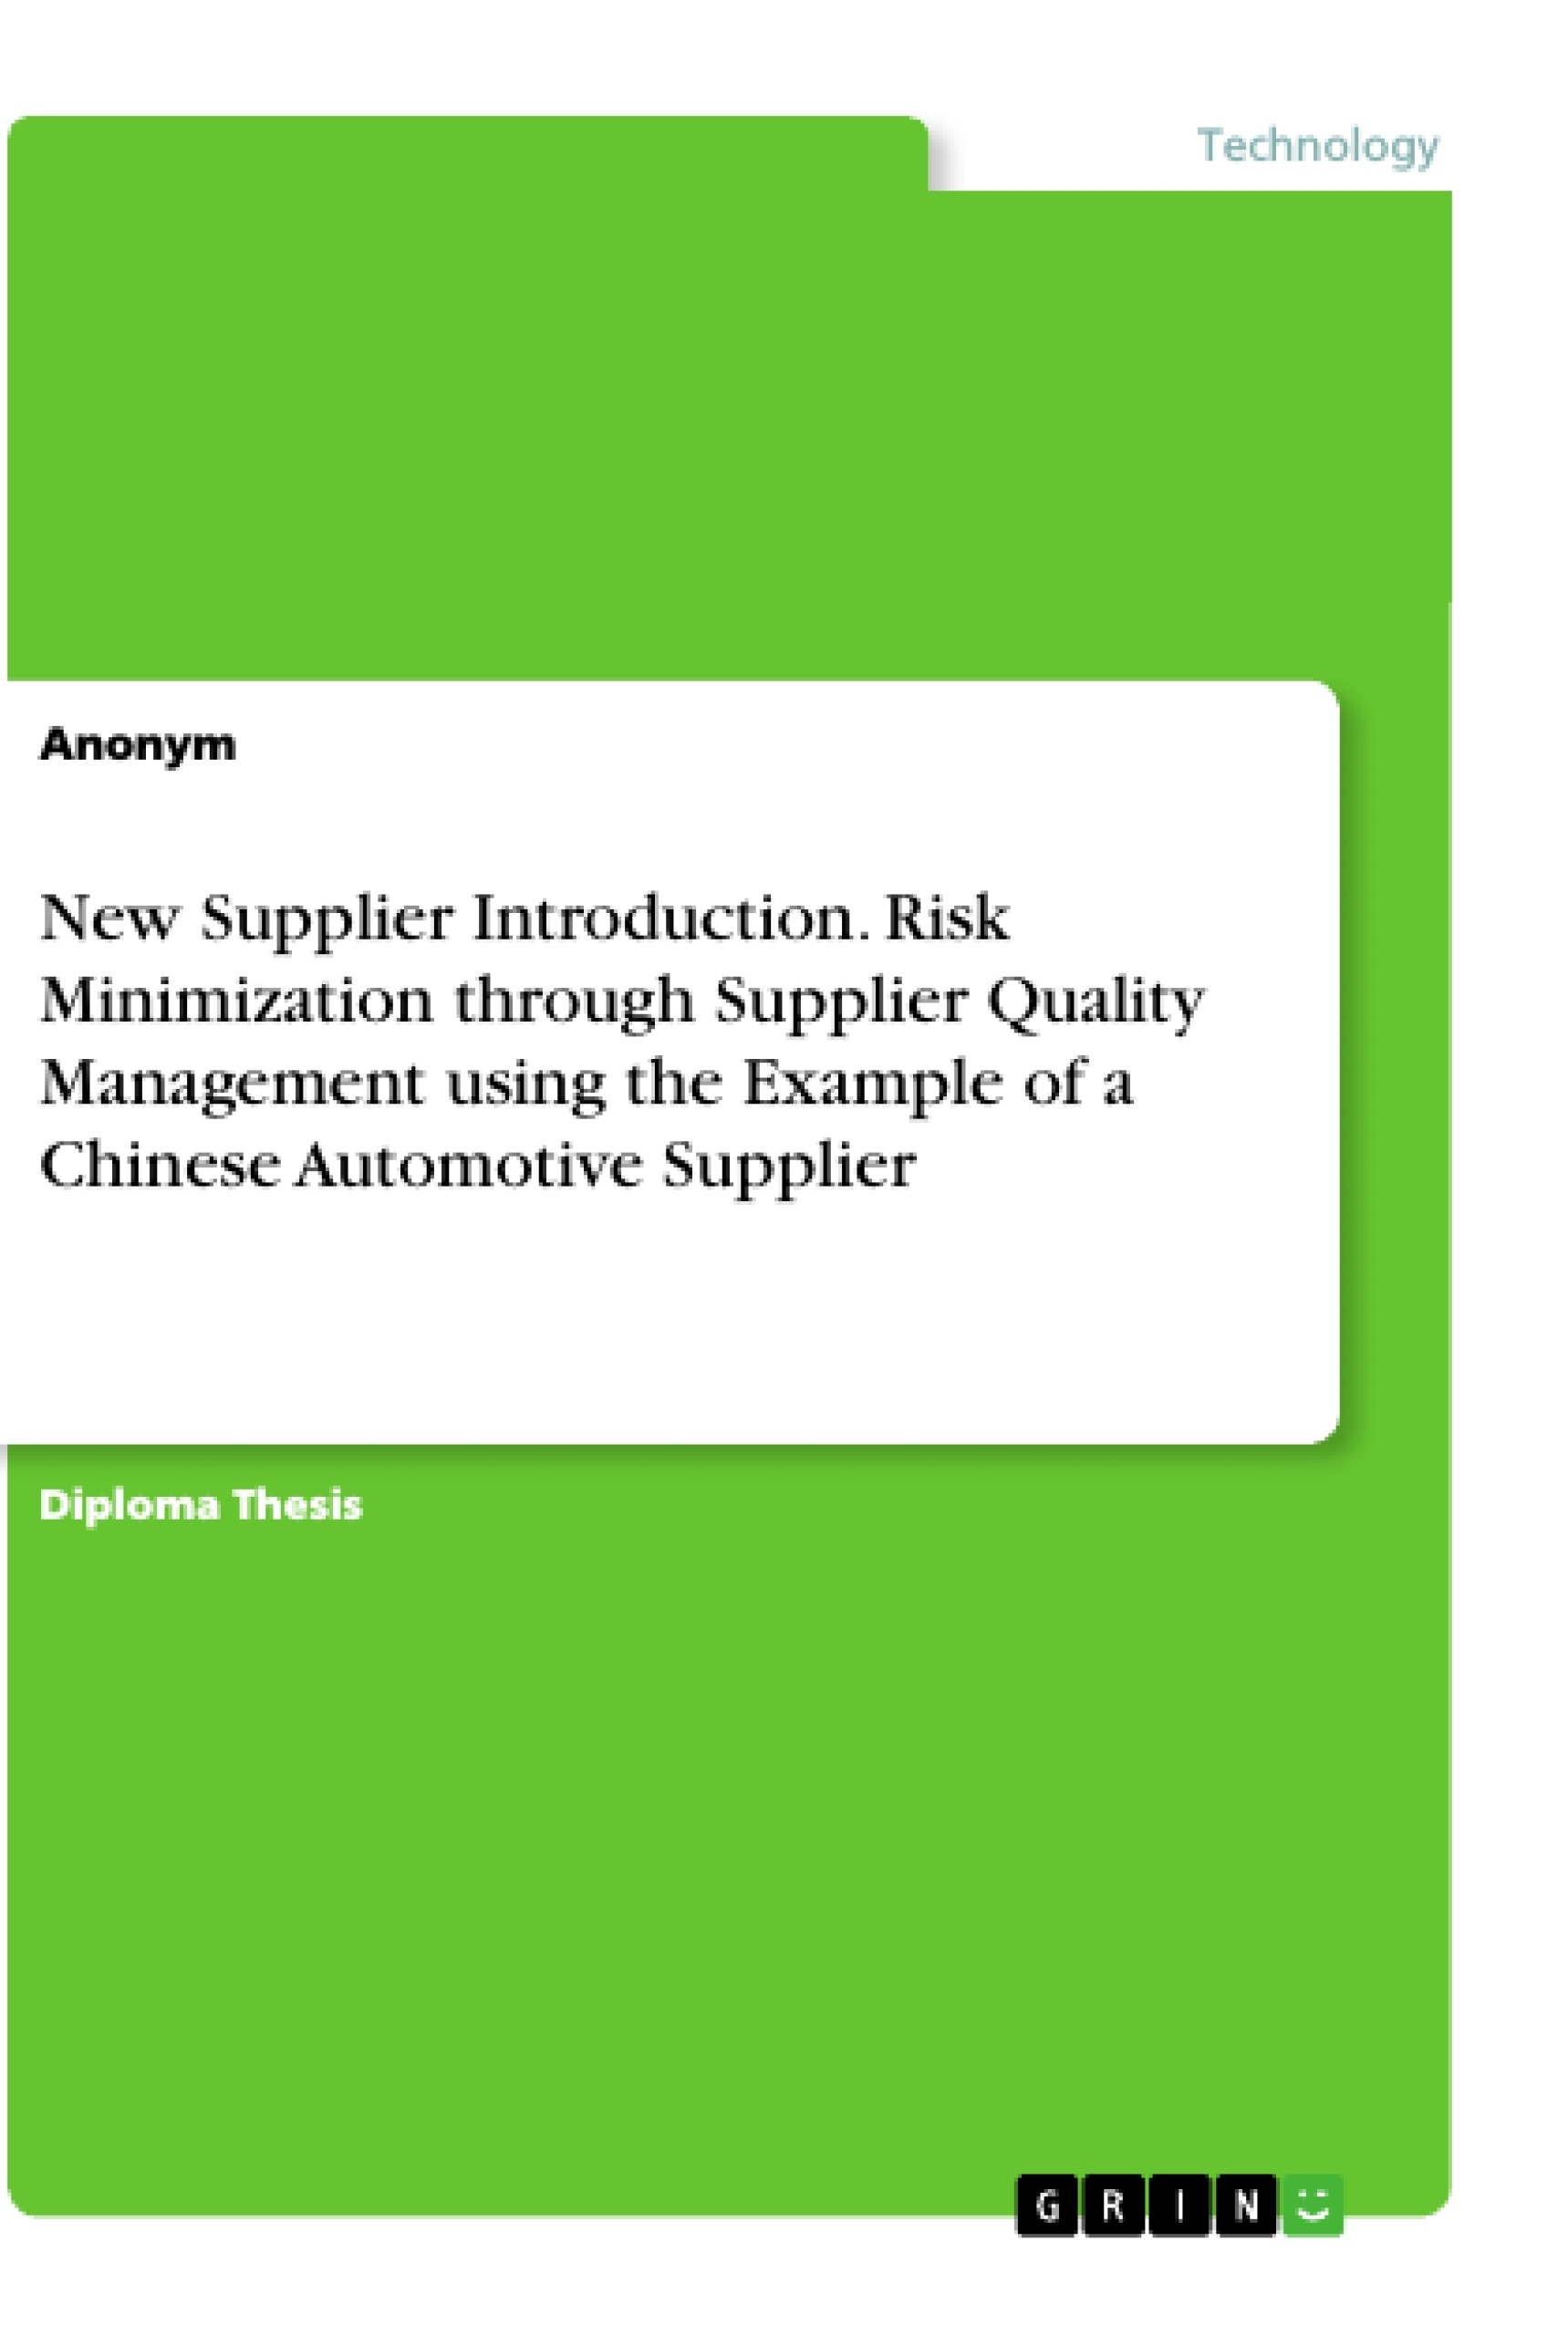 Title: New Supplier Introduction. Risk Minimization through Supplier Quality Management using the Example of a Chinese Automotive Supplier